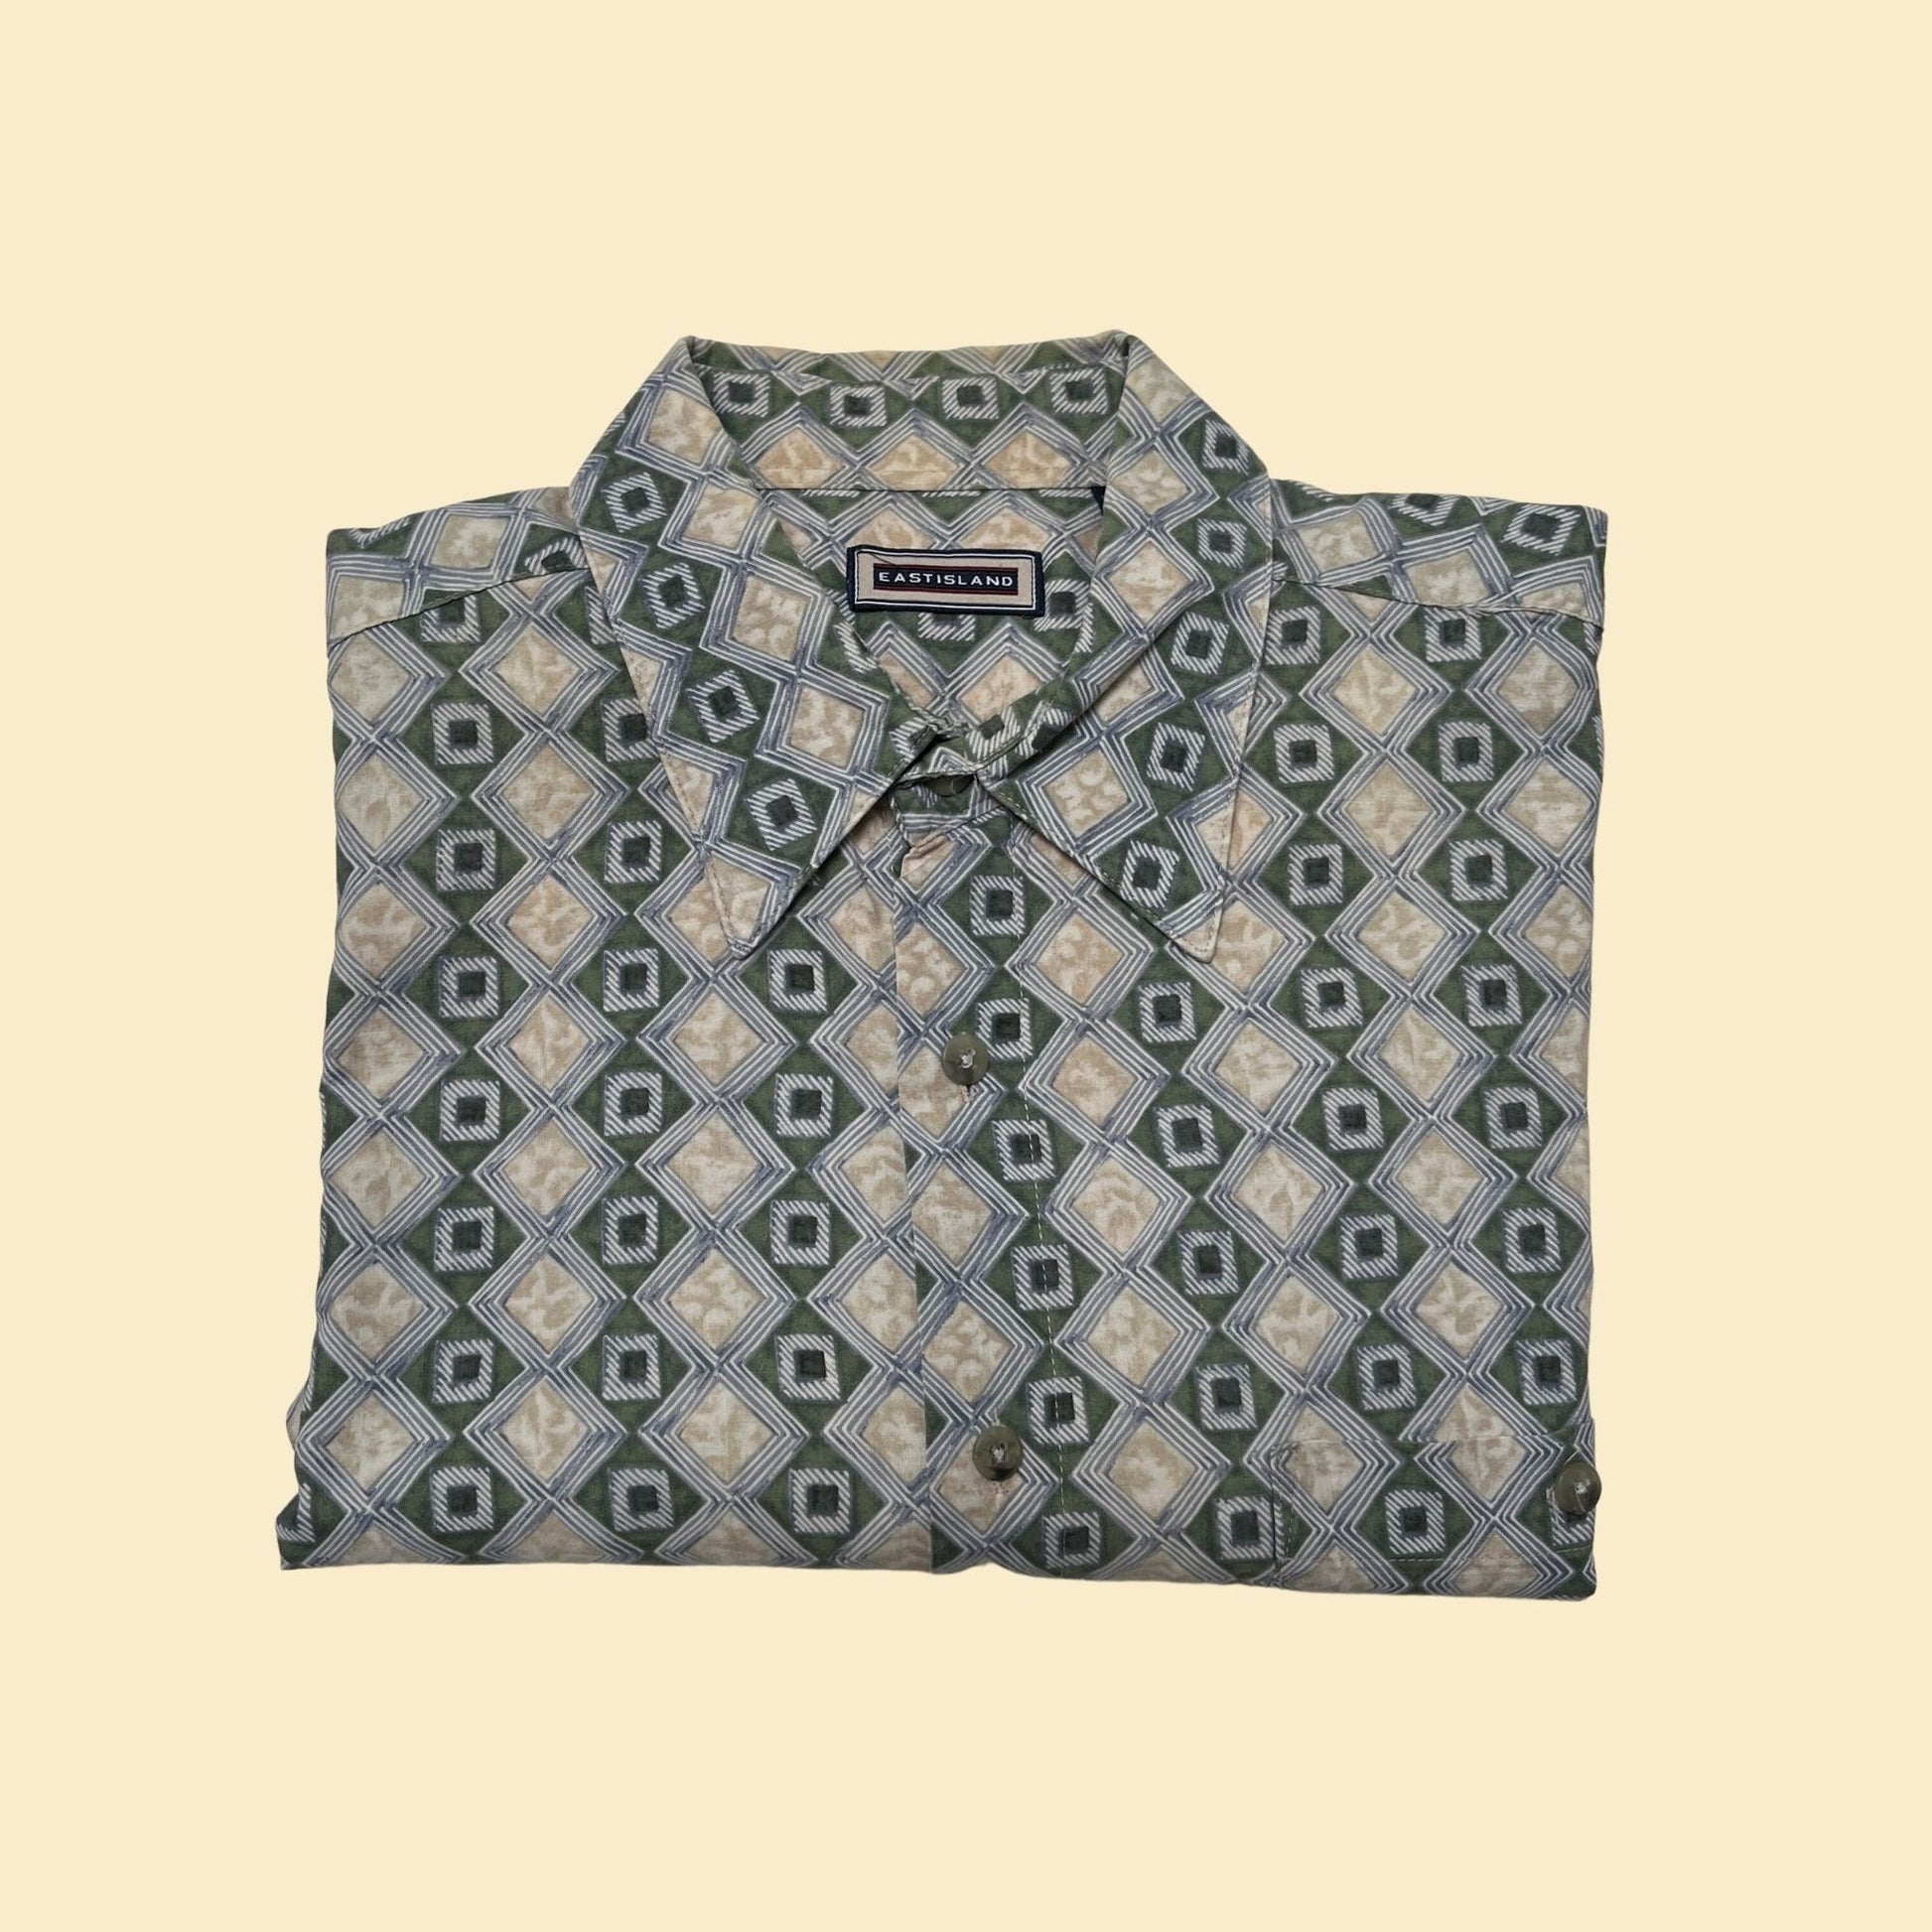 90s geometric shirt by Eastiland, men's short sleeve medium button down with geometric diamond/box pattern, blue green and beige casual top